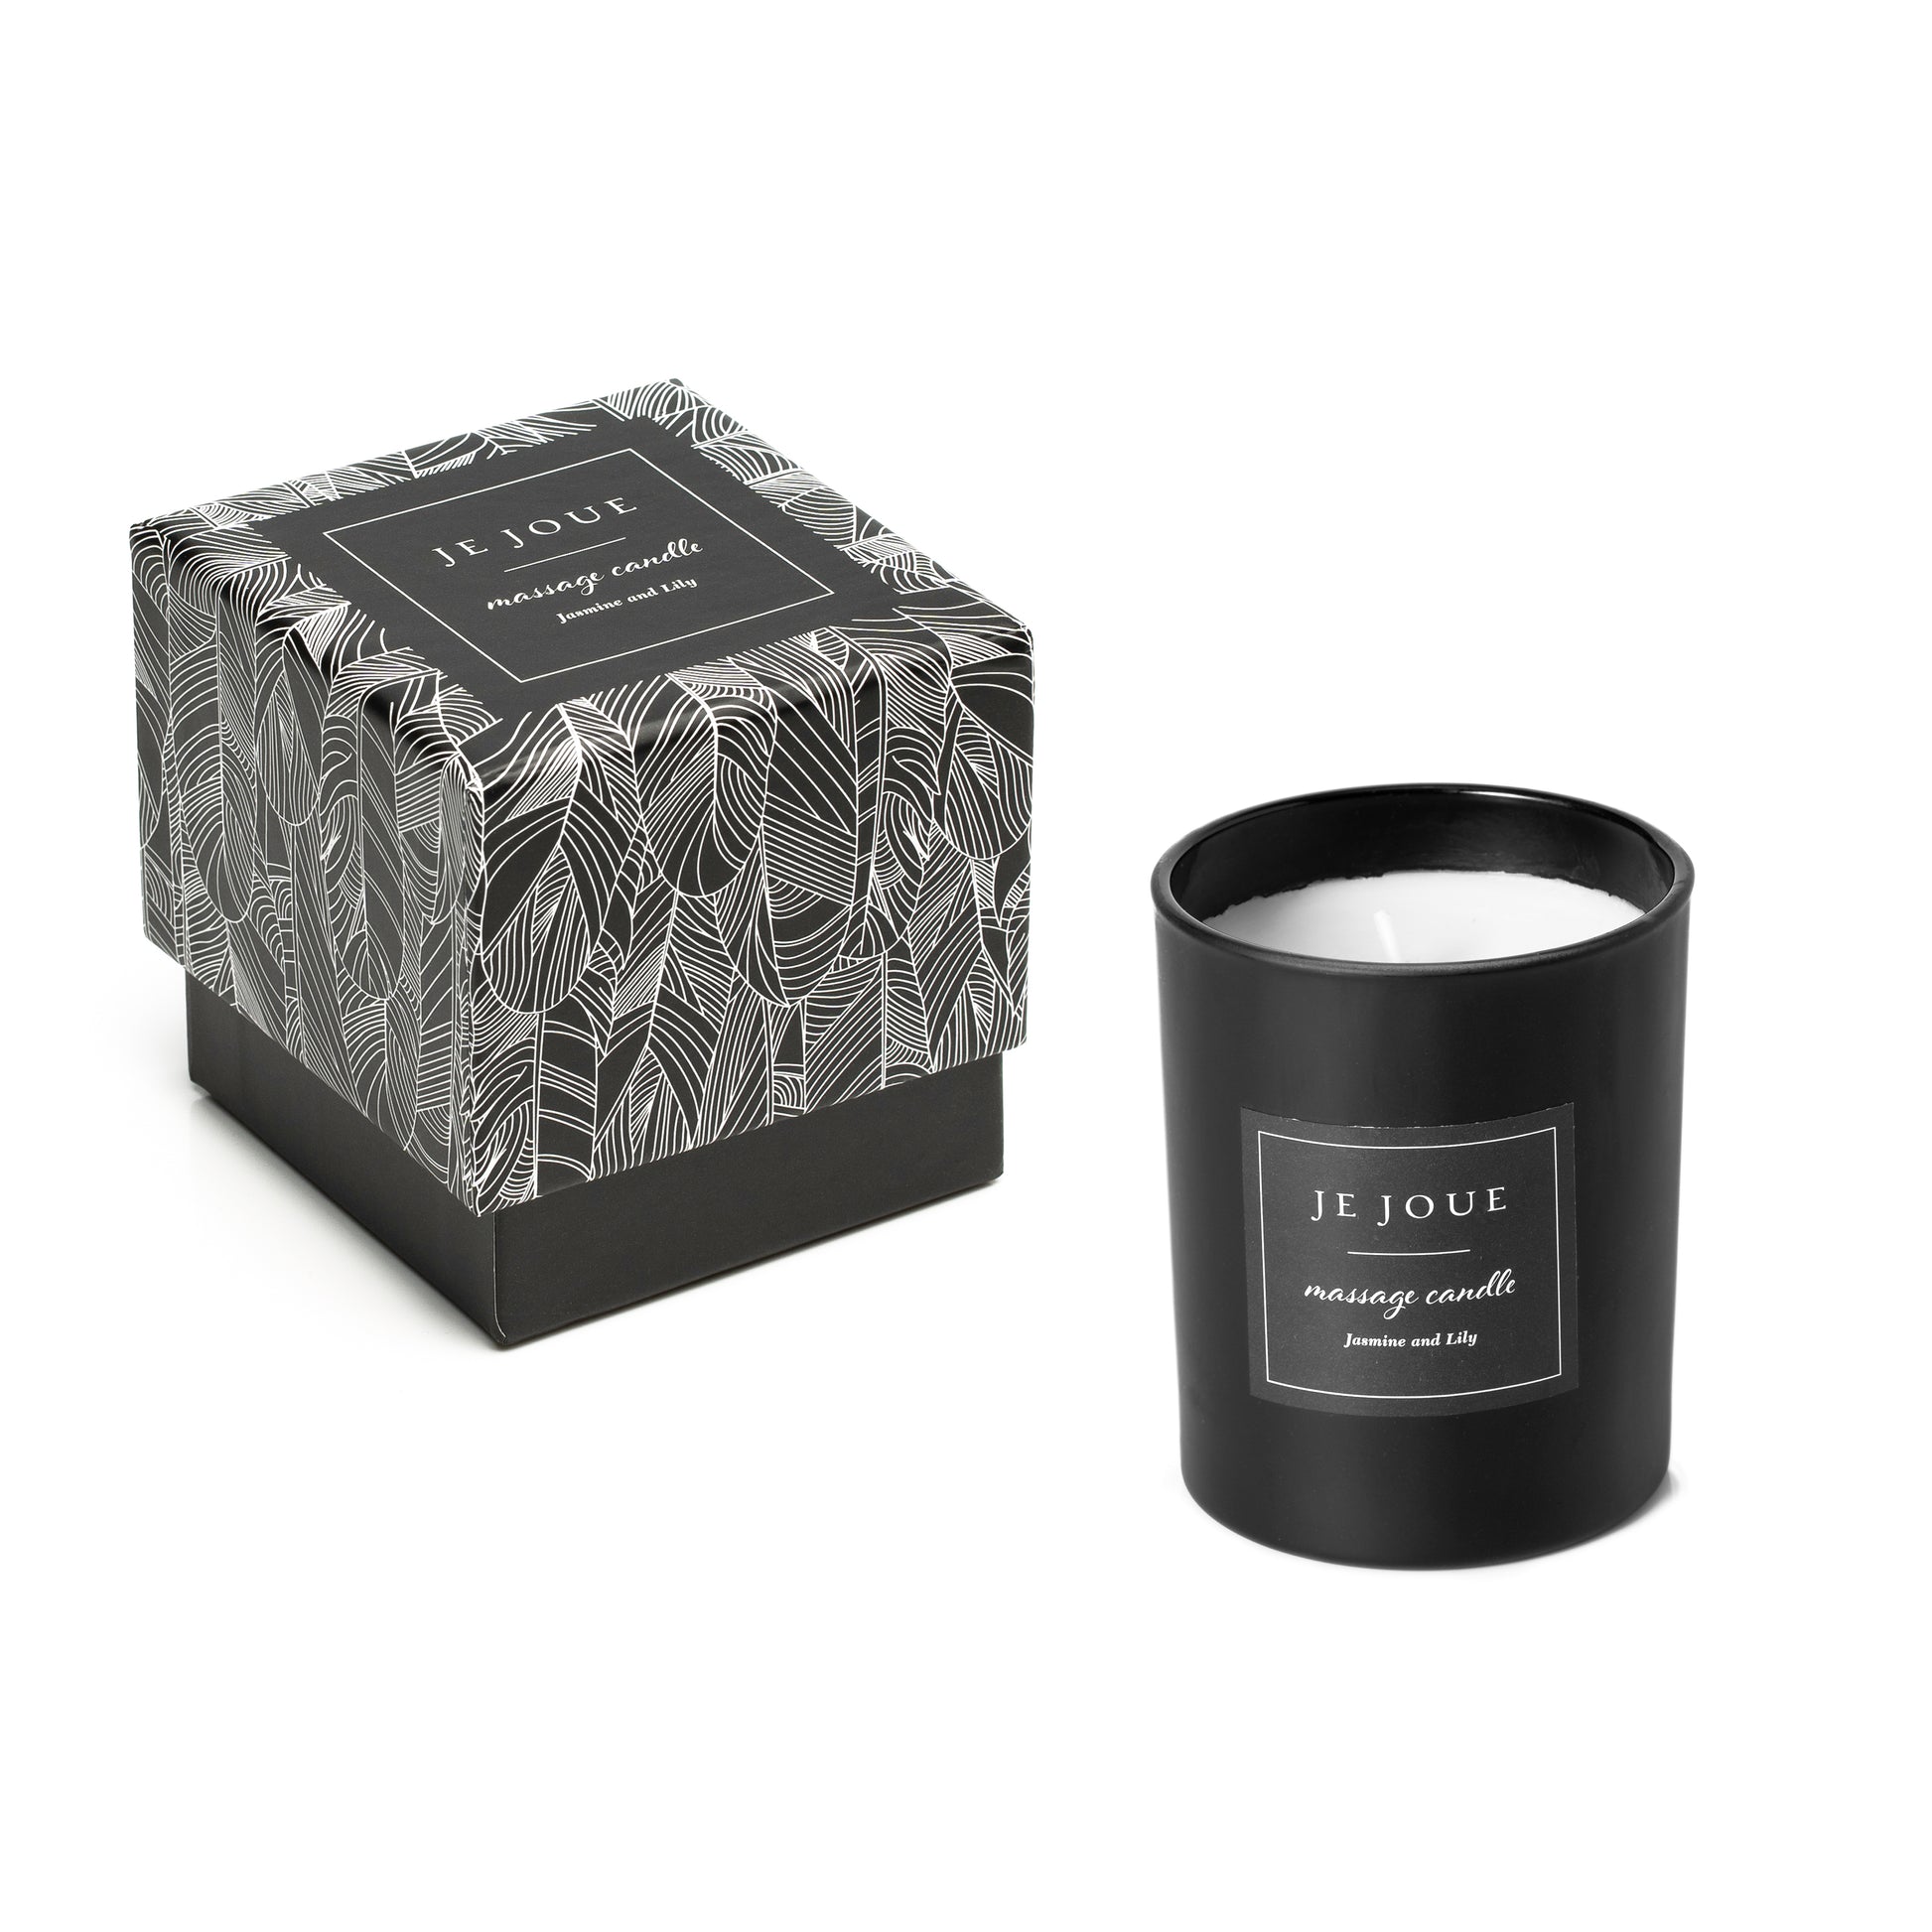 Je Joue Massage candle with box